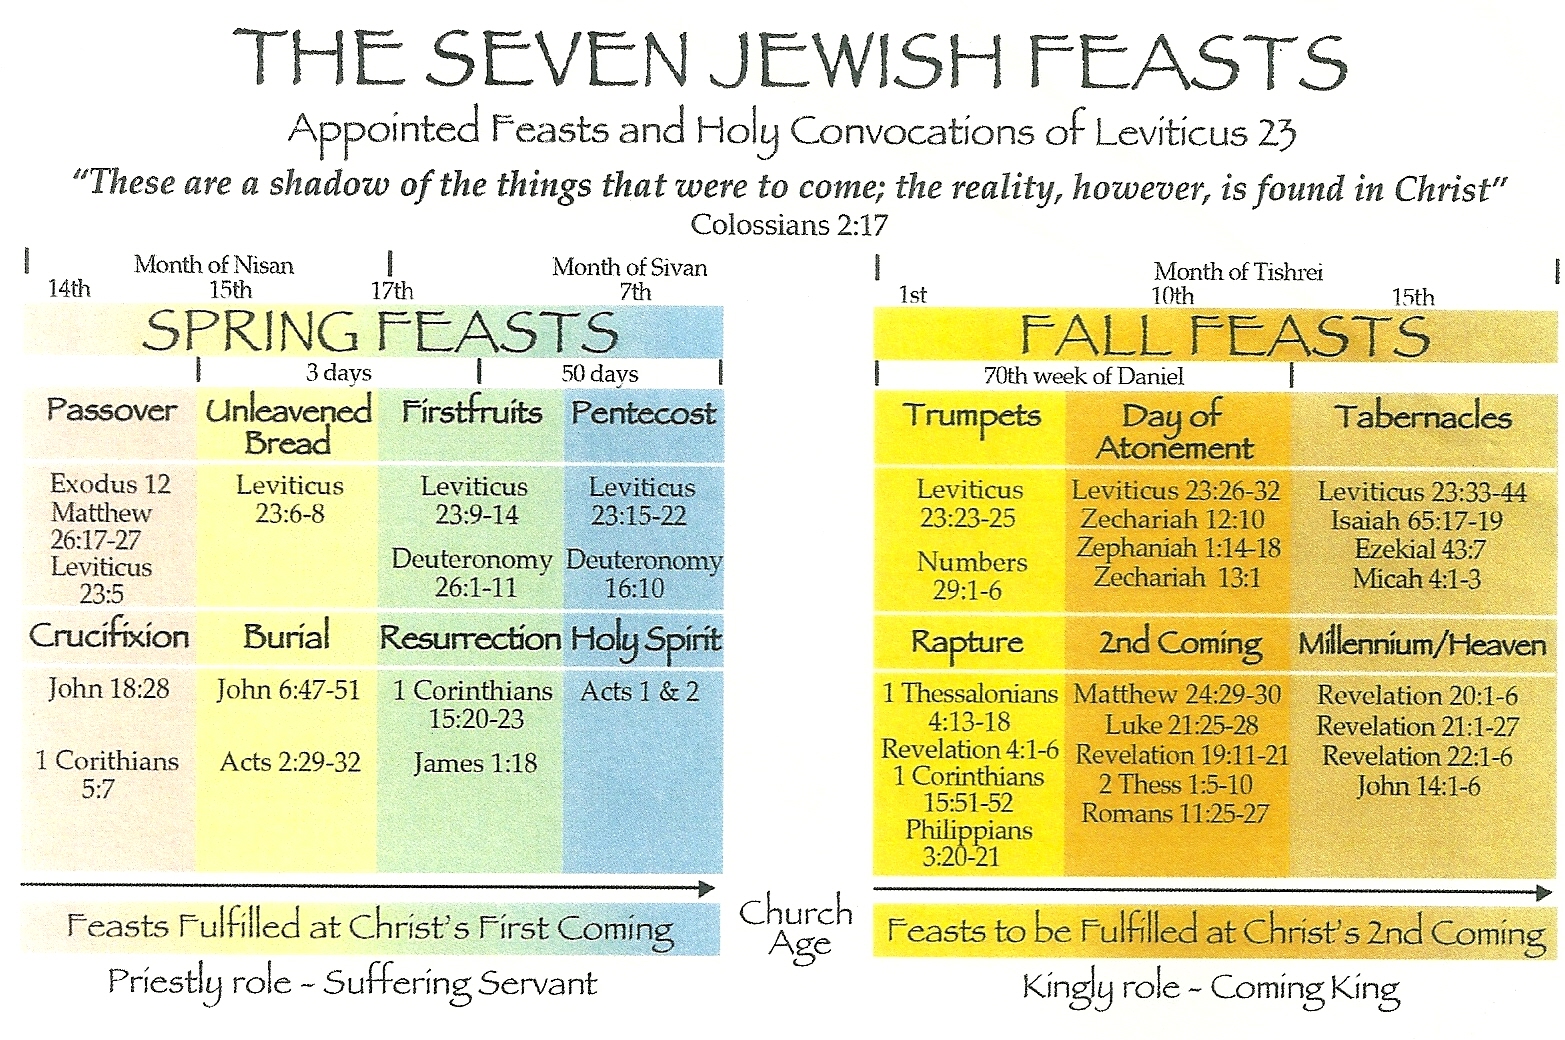 JEWISH FEASTS ARE SHADOWS OF JESUS THE MESSIAH Evolution is a Myth